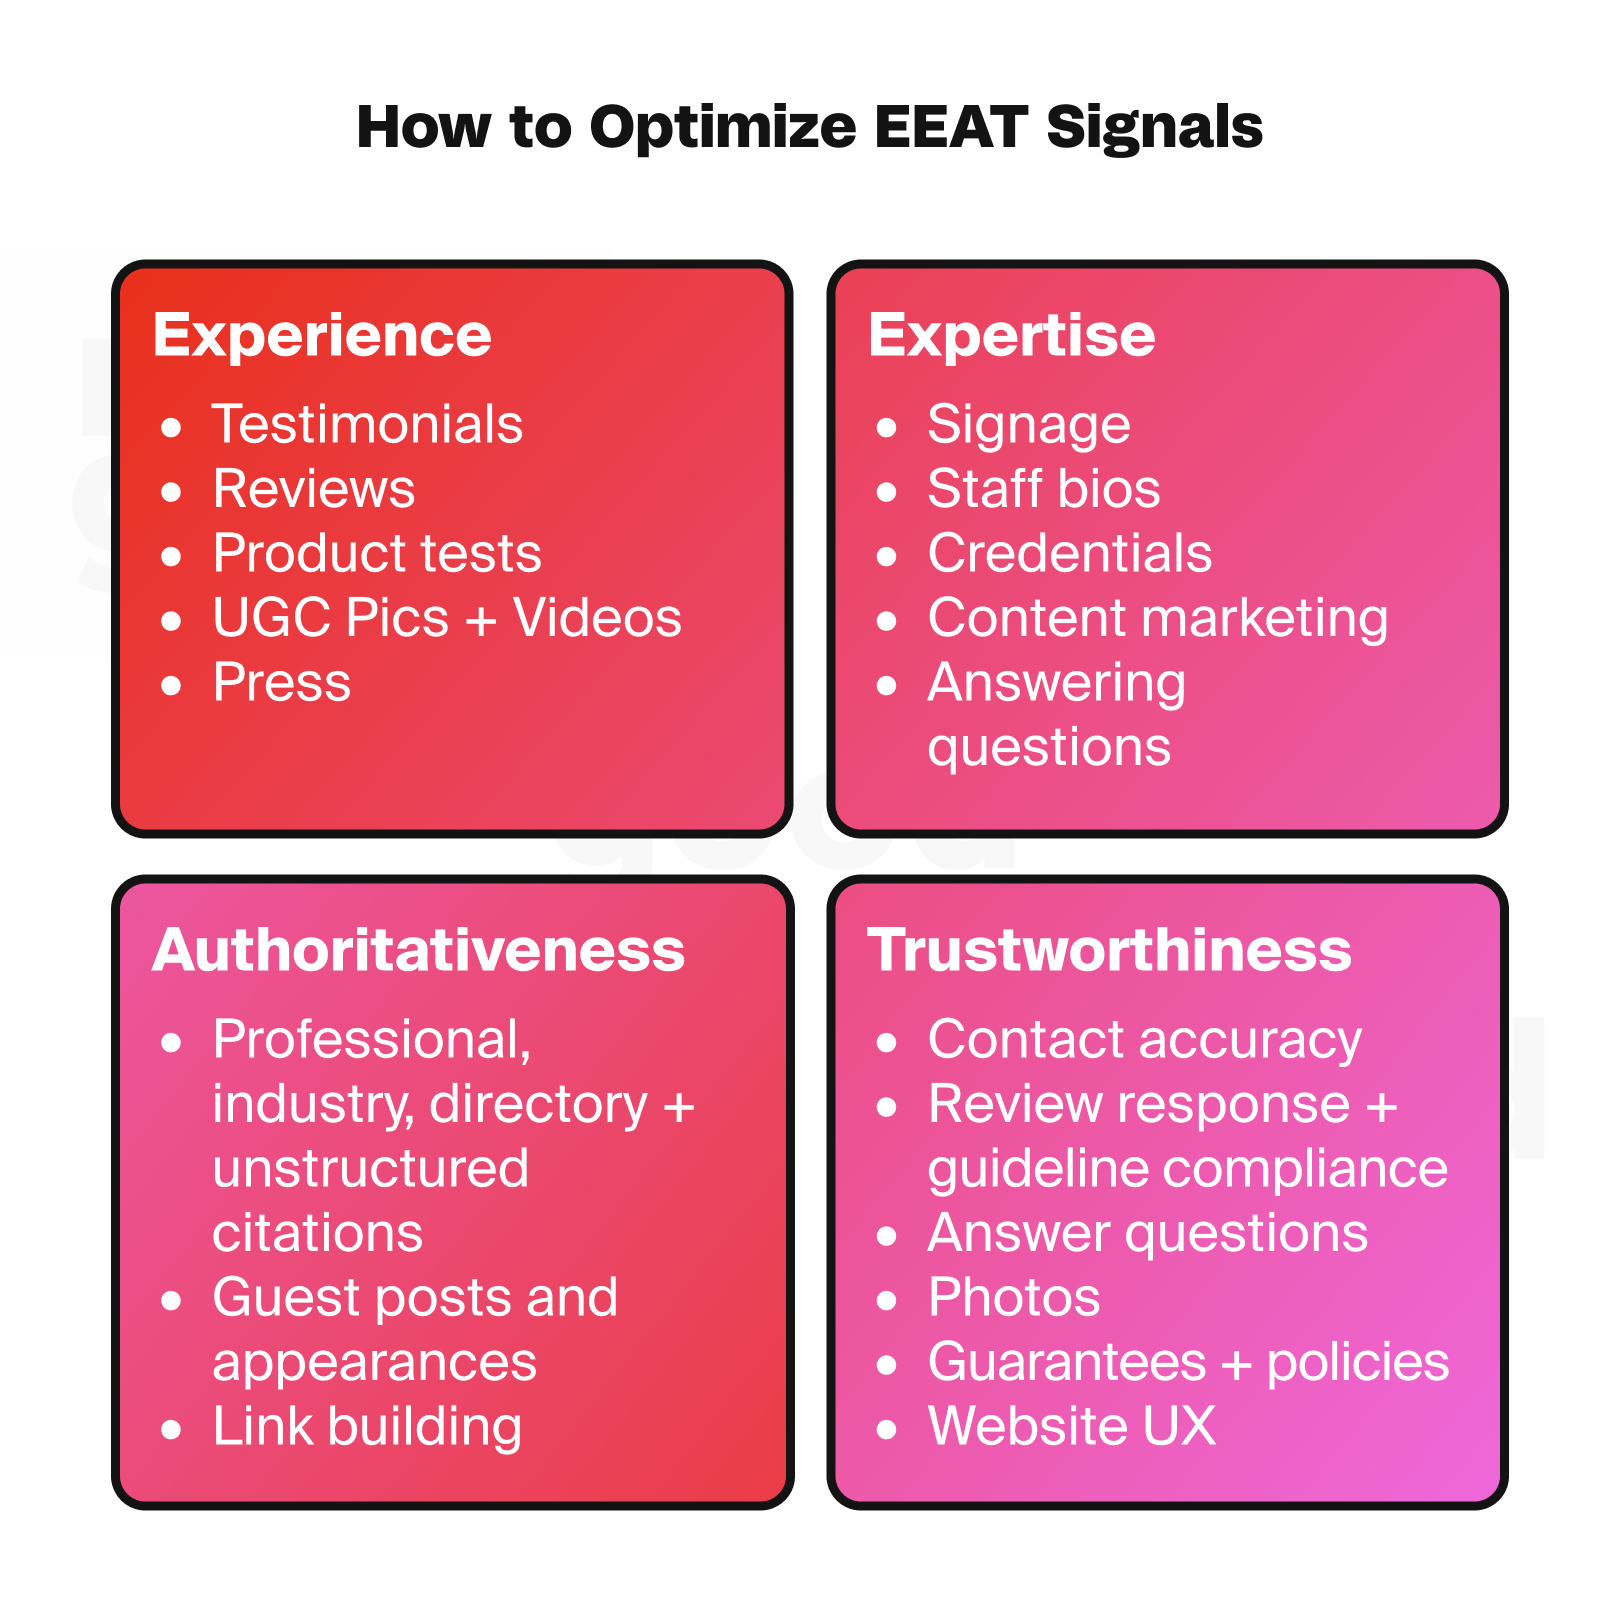 How to optimize EEAT signals